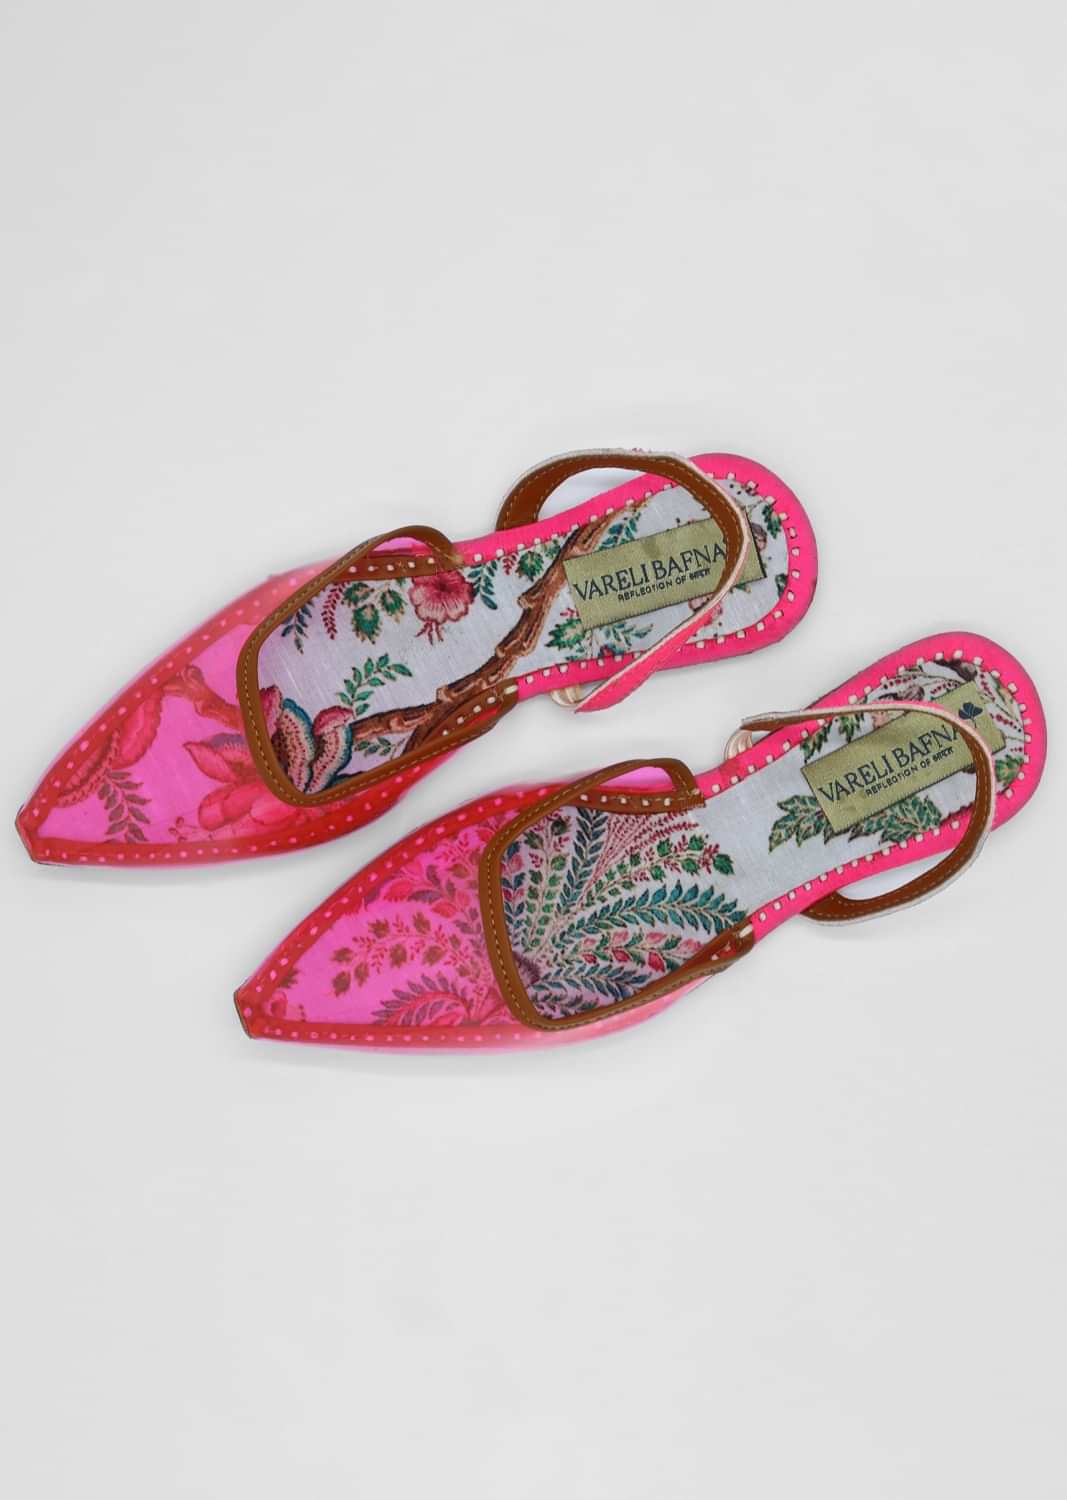 Deep Pink Printed Flats In The Vinyl Leather Backstrap, Pointed Toe-Design